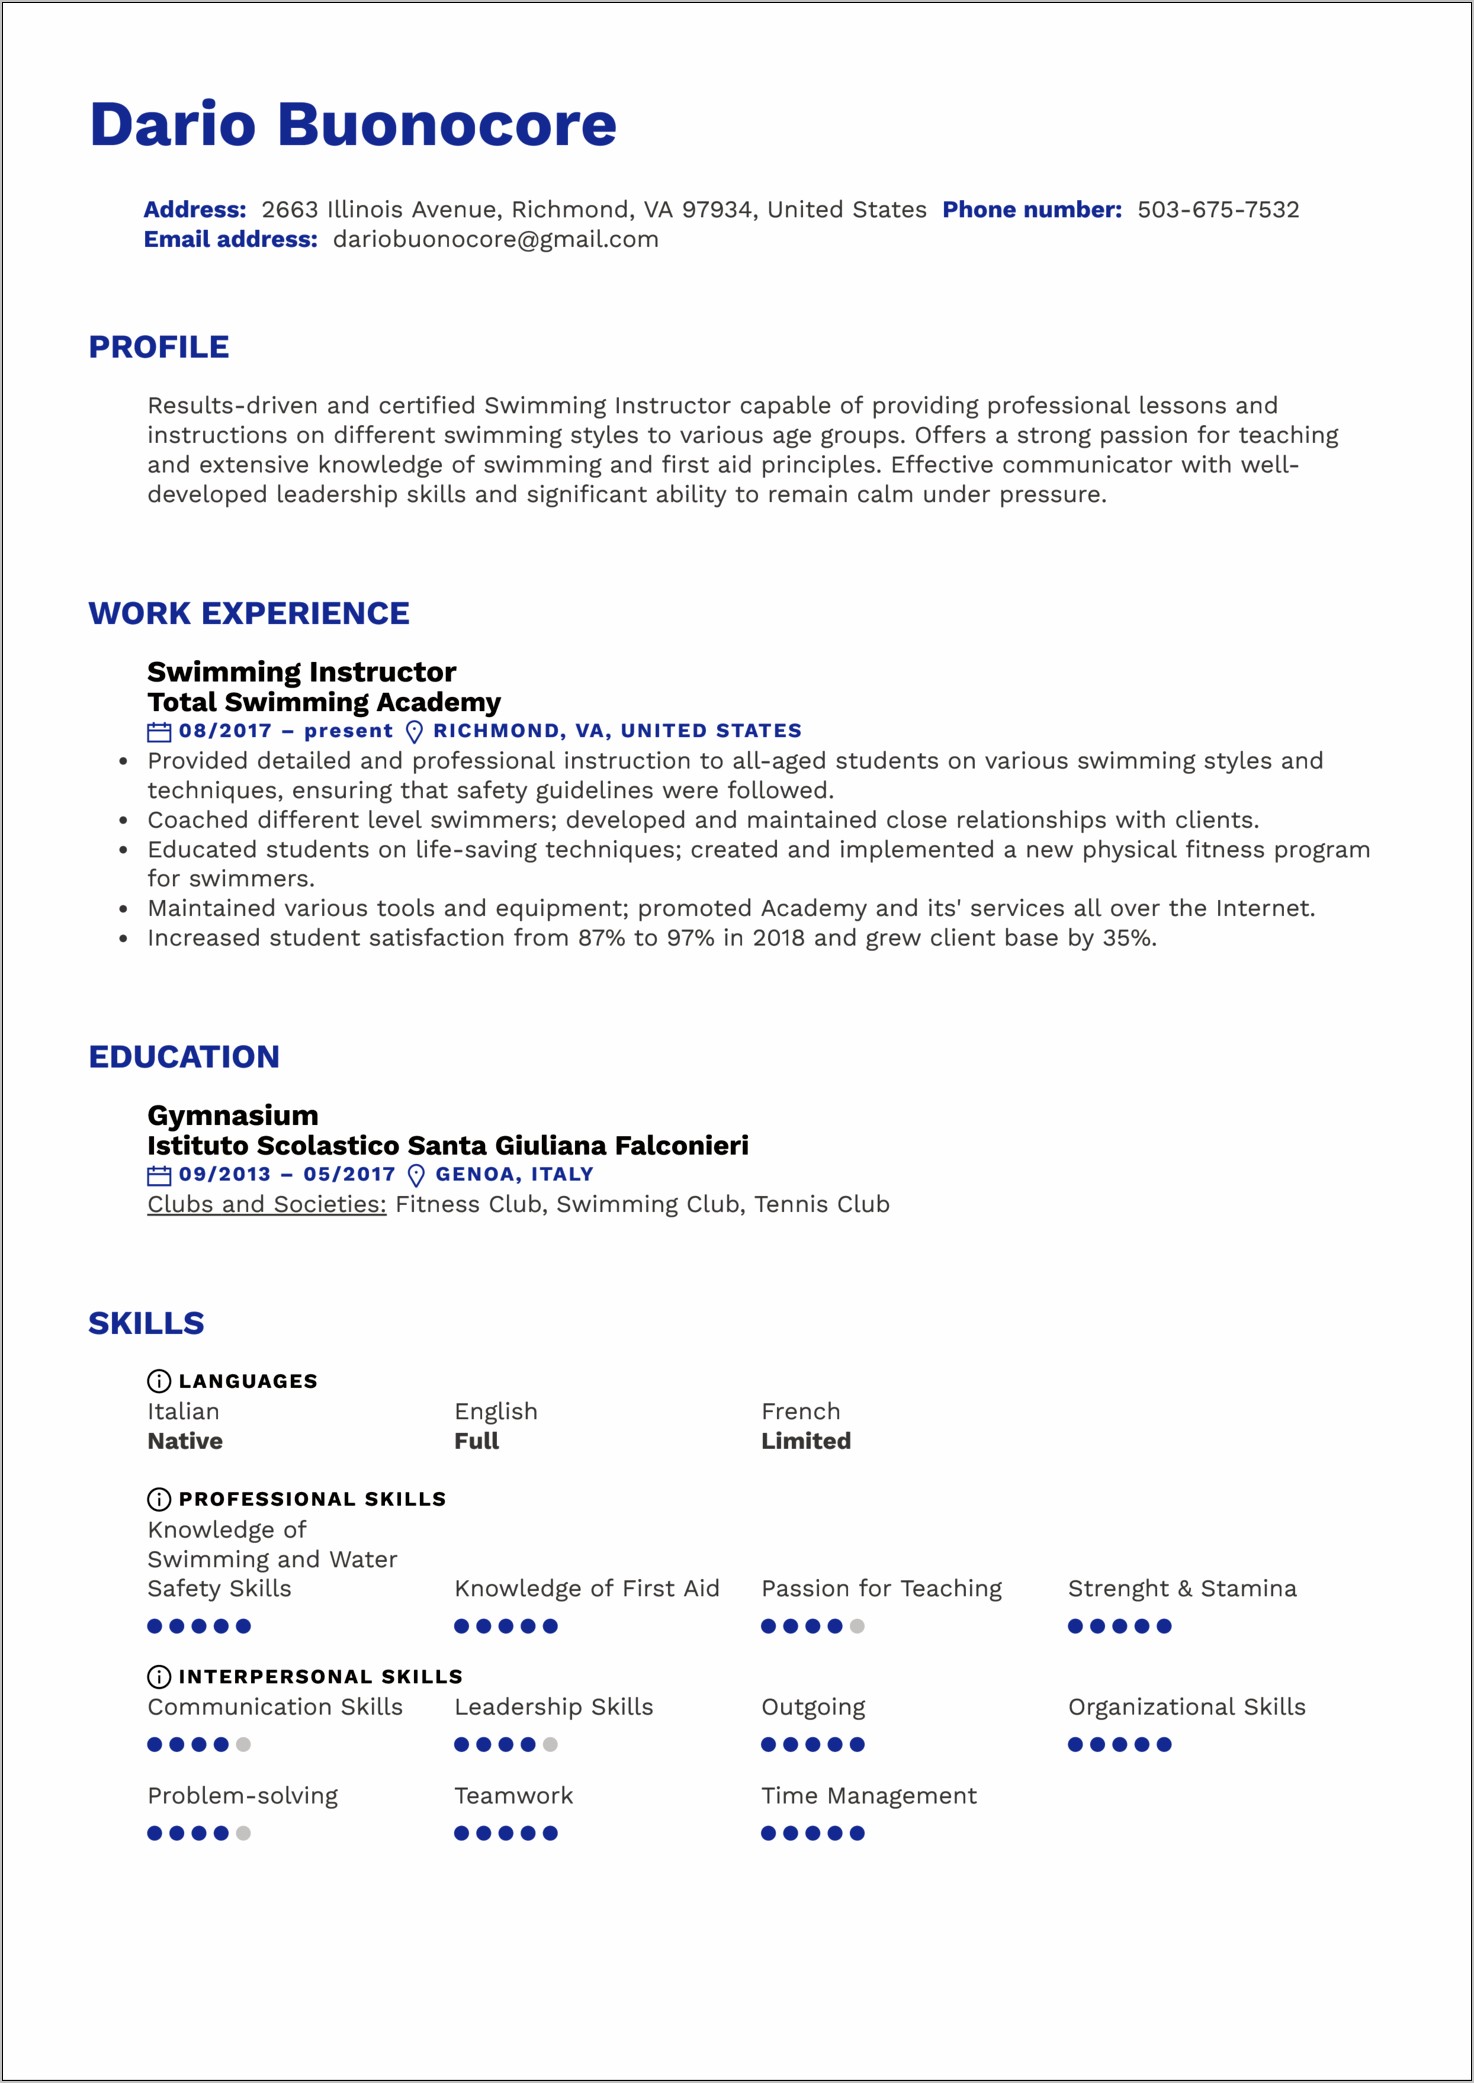 First Aid Skills In Resume